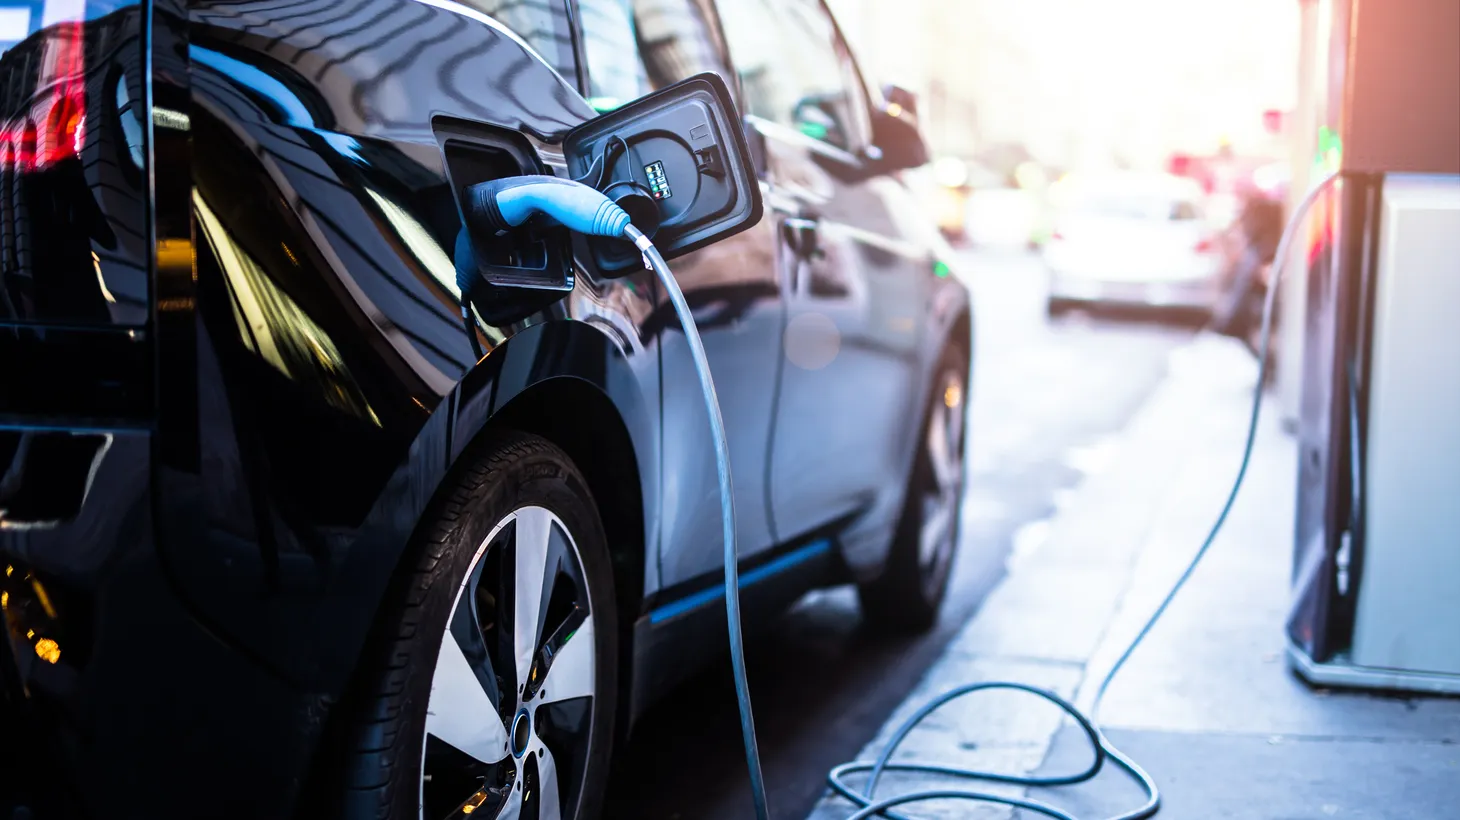 Governor Gavin Newsom signed a law banning the sale of all new gas-powered cars by 2035, so is now the time to buy an EV if you’ve been on the fence?